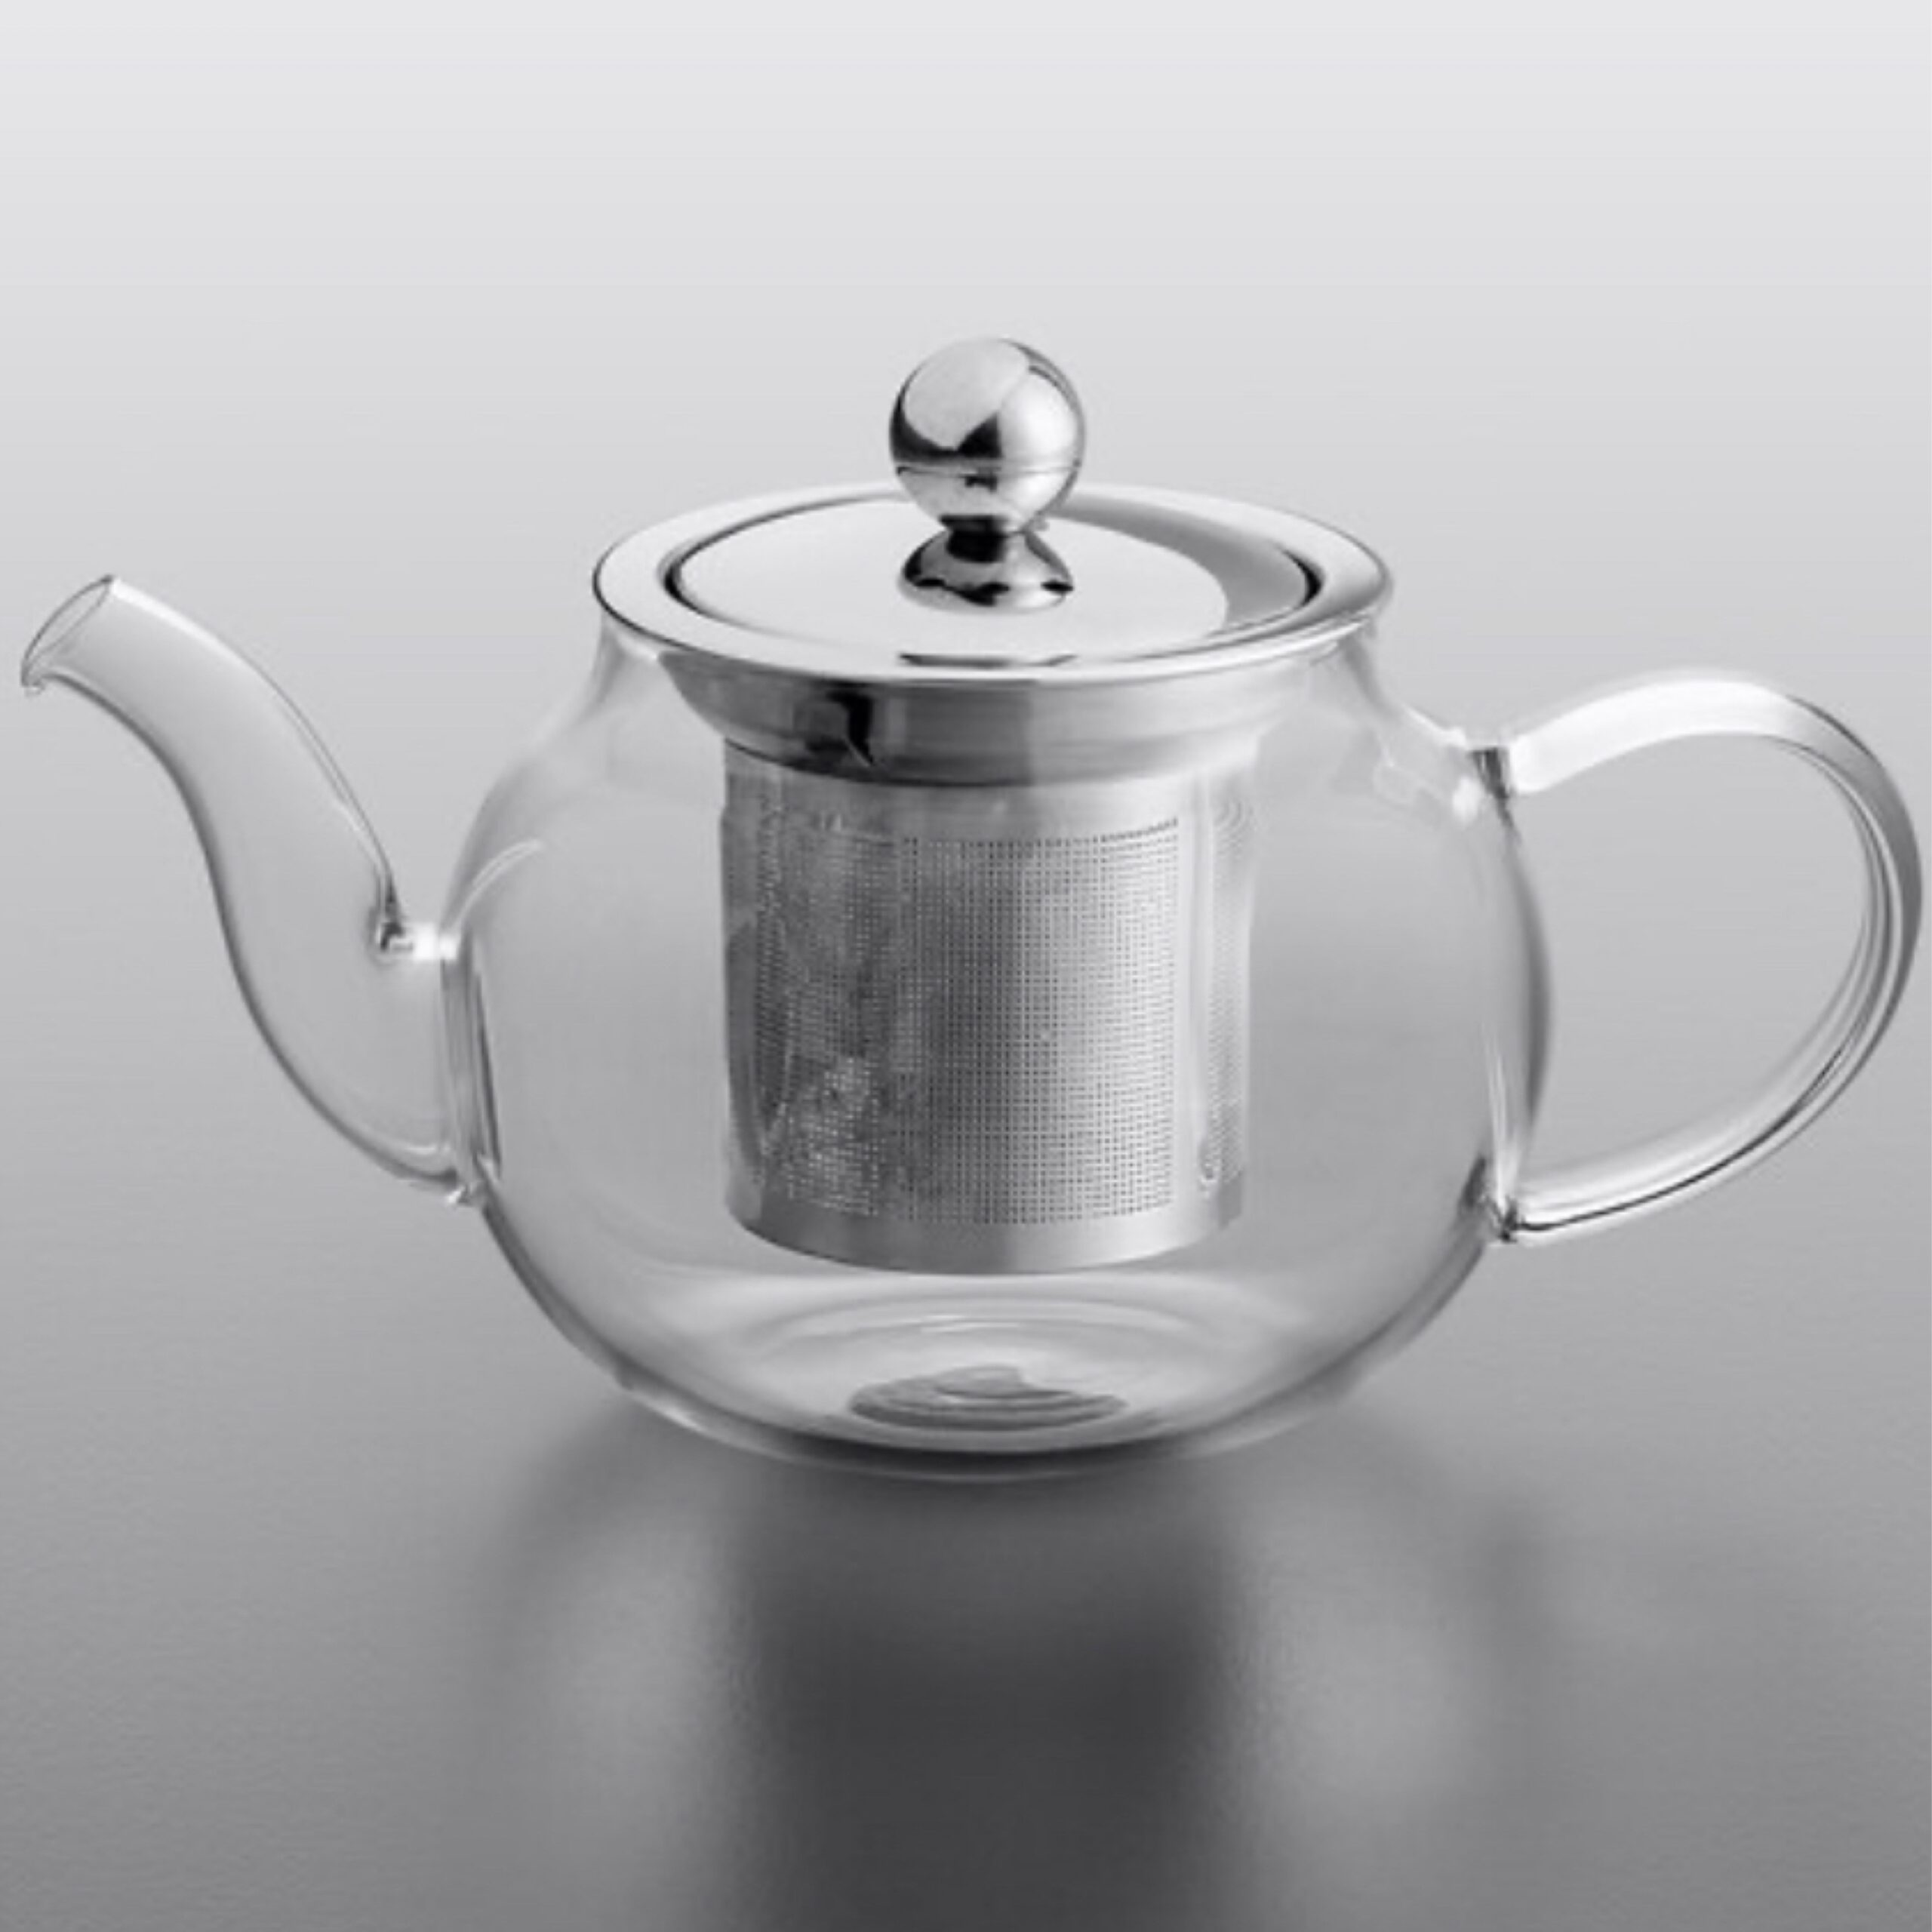 Petite Teapot with infuser, 12 oz